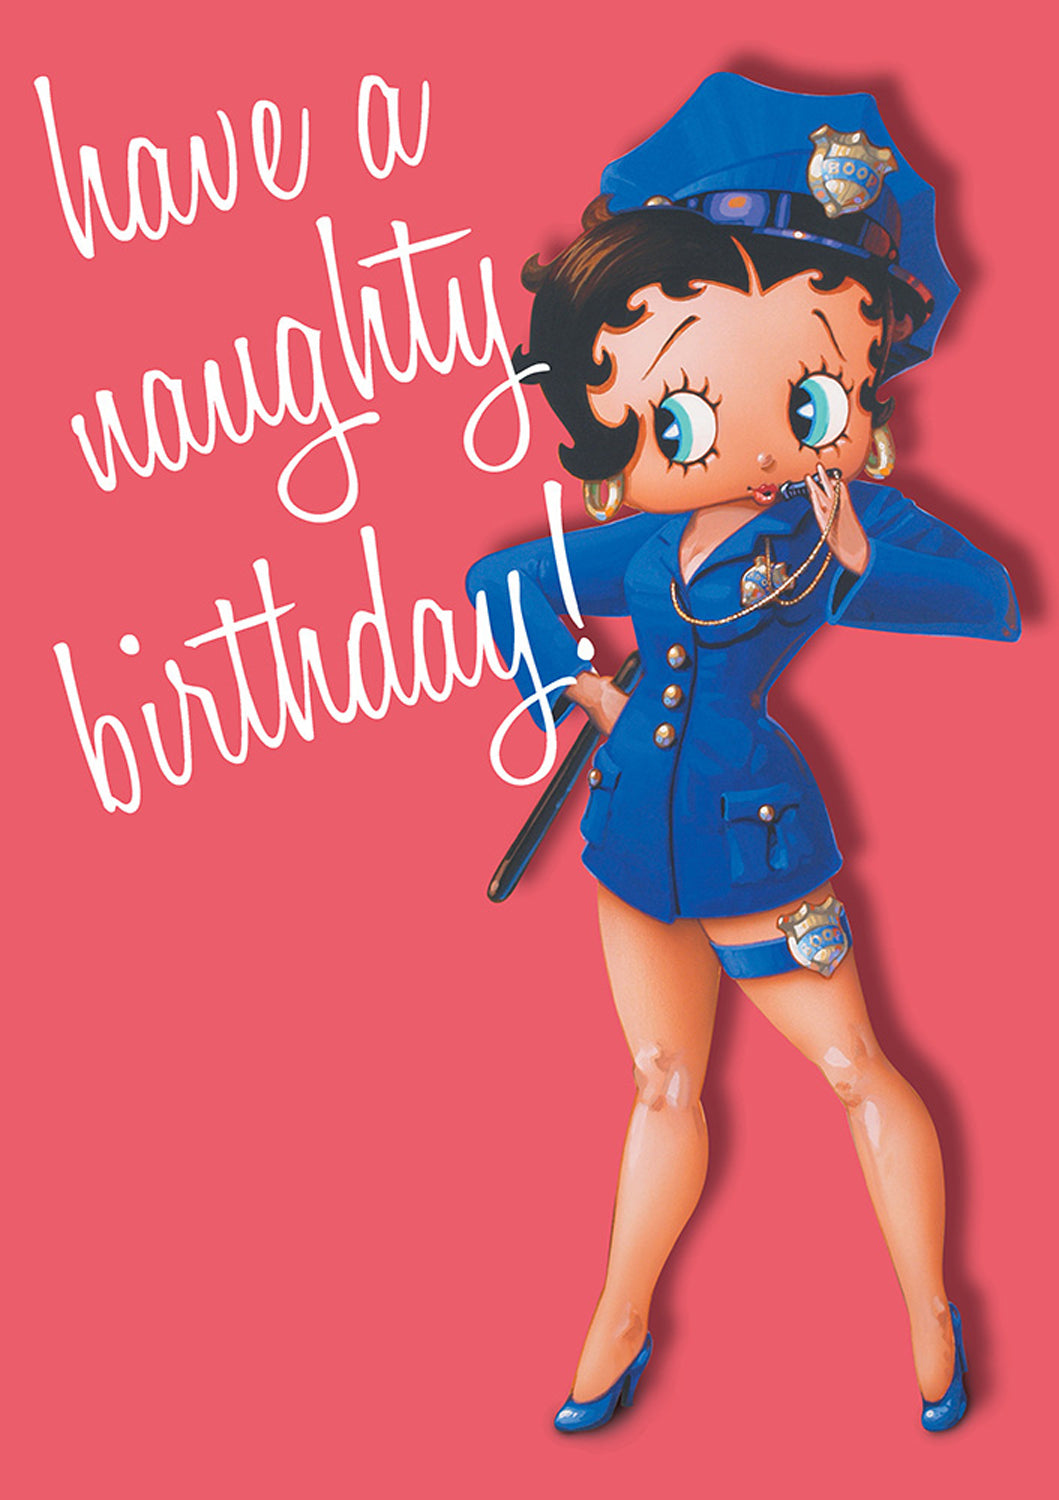 Betty Boop Have a Naughty Birthday Card